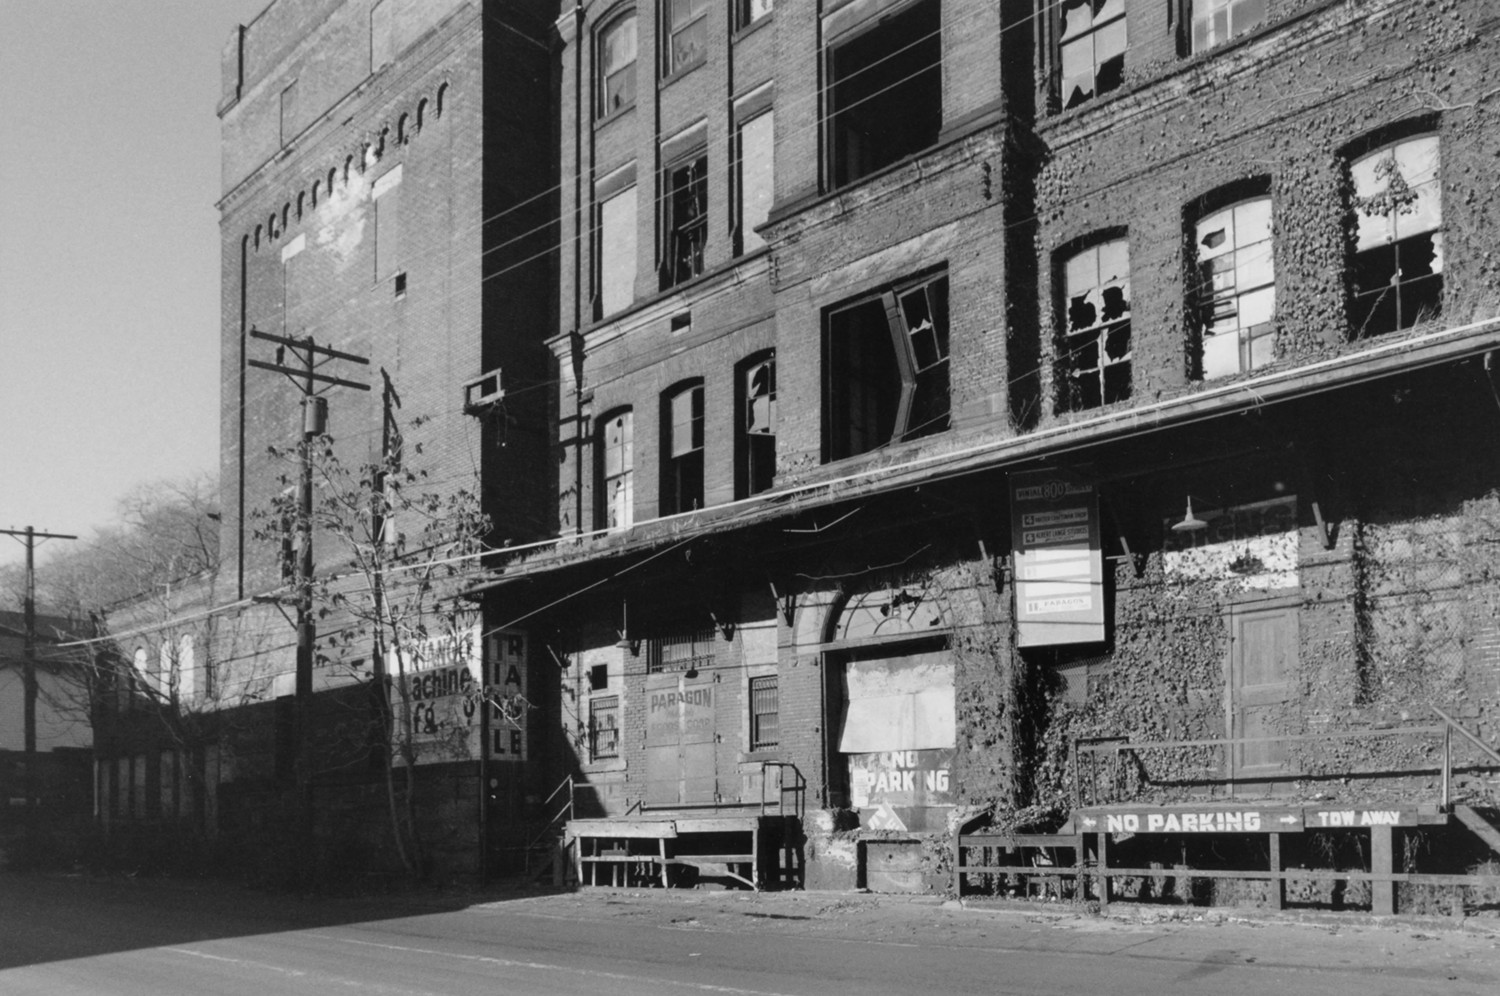 Eberhardt and Ober Brewery, Pittsburgh Pennsylvania Vinial Street frontage, looking north (1986)